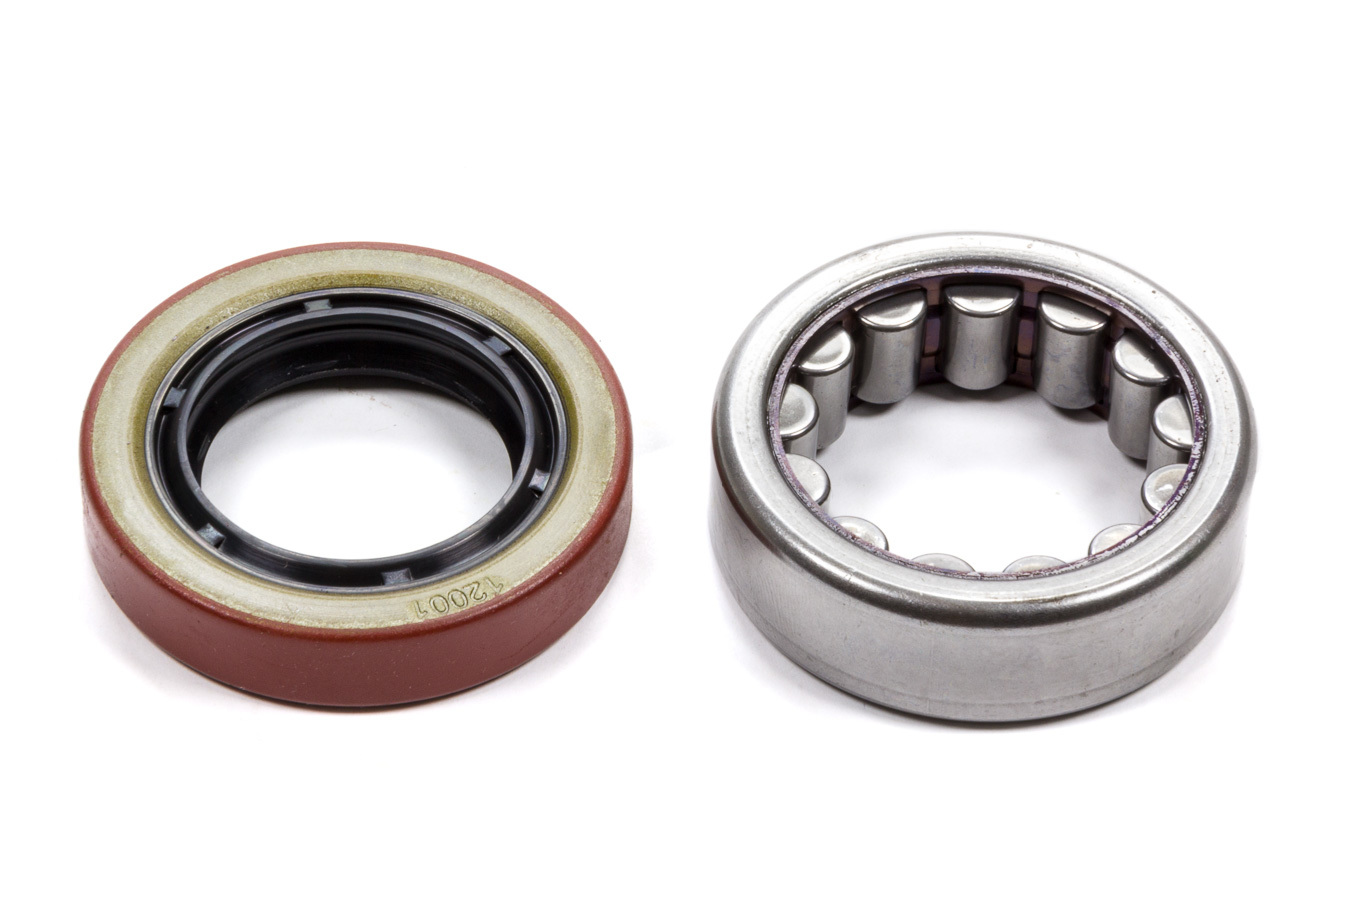 Yukon Gear AK1563 Axle Bearing, 2.250 in OD, 1.400 in ID, Seal Included, Tapered, Various Applications, Kit